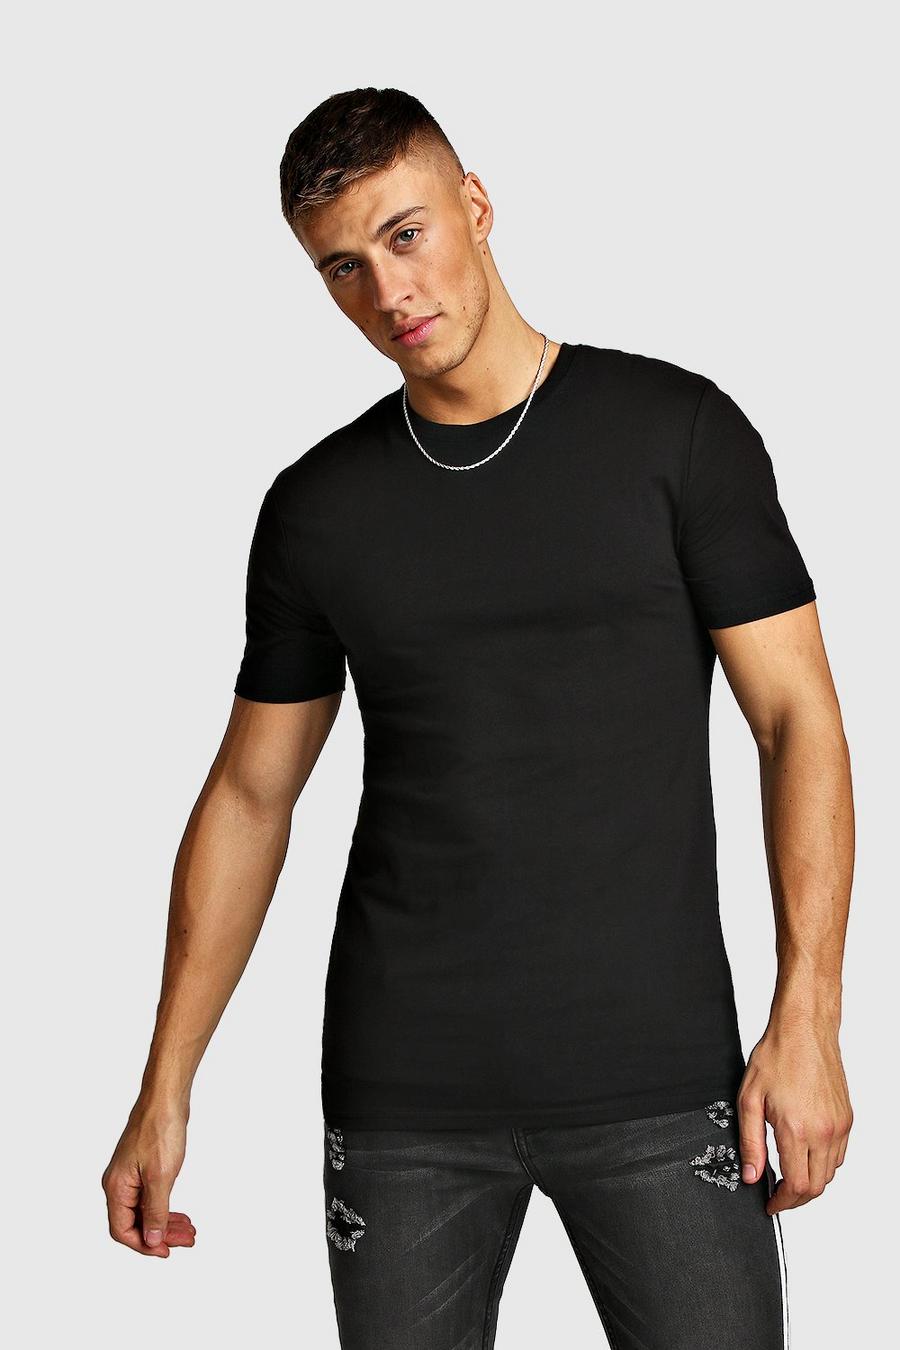 Black Muscle Fit Crew Neck T-Shirt image number 1